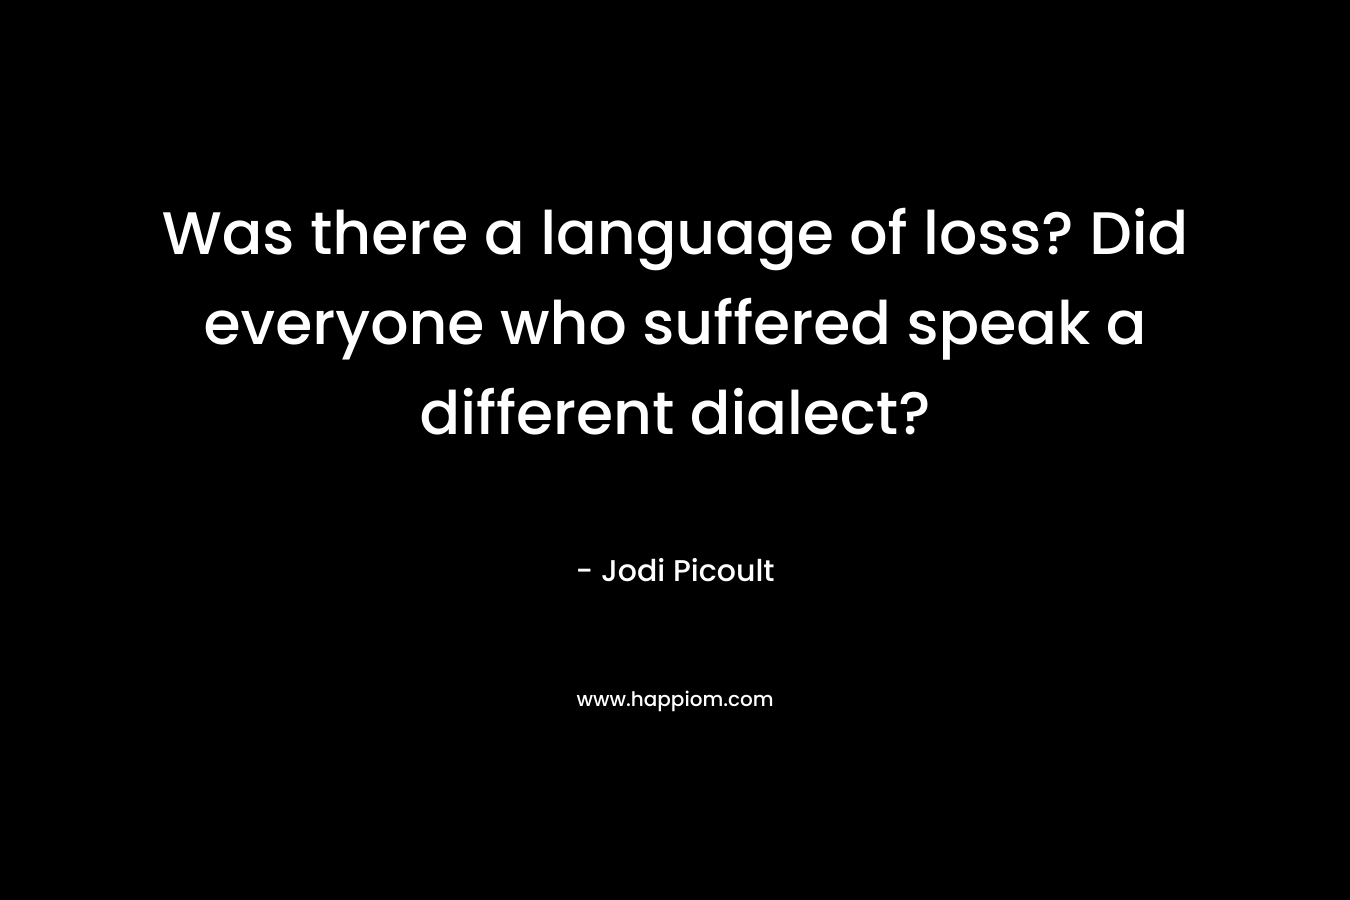 Was there a language of loss? Did everyone who suffered speak a different dialect?